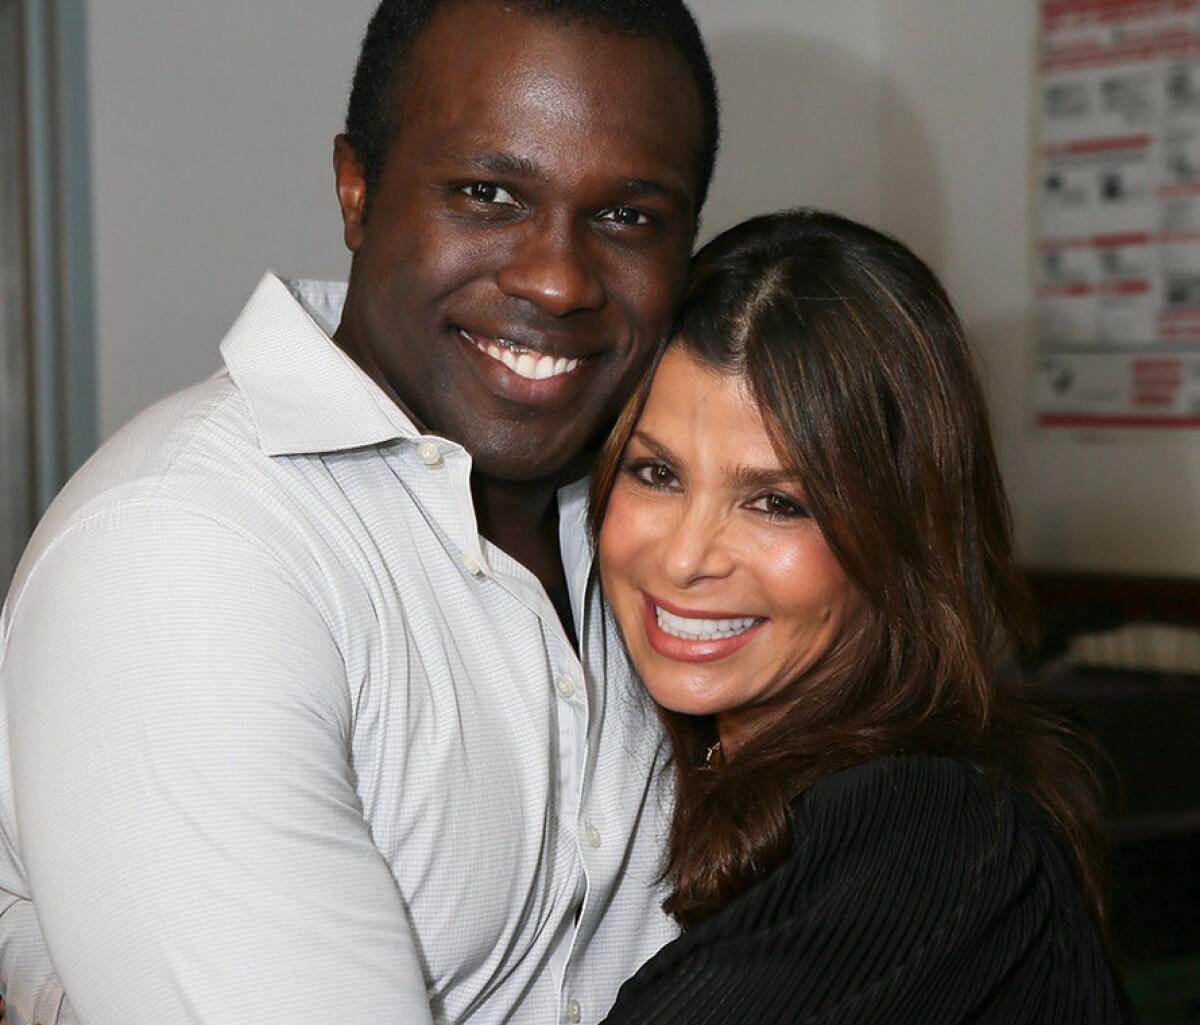 Paula Abdul embraces actor Joshua Henry backstage at the Ahnmanson Theatre after the opening night performance of "The Scottsboro Boys."